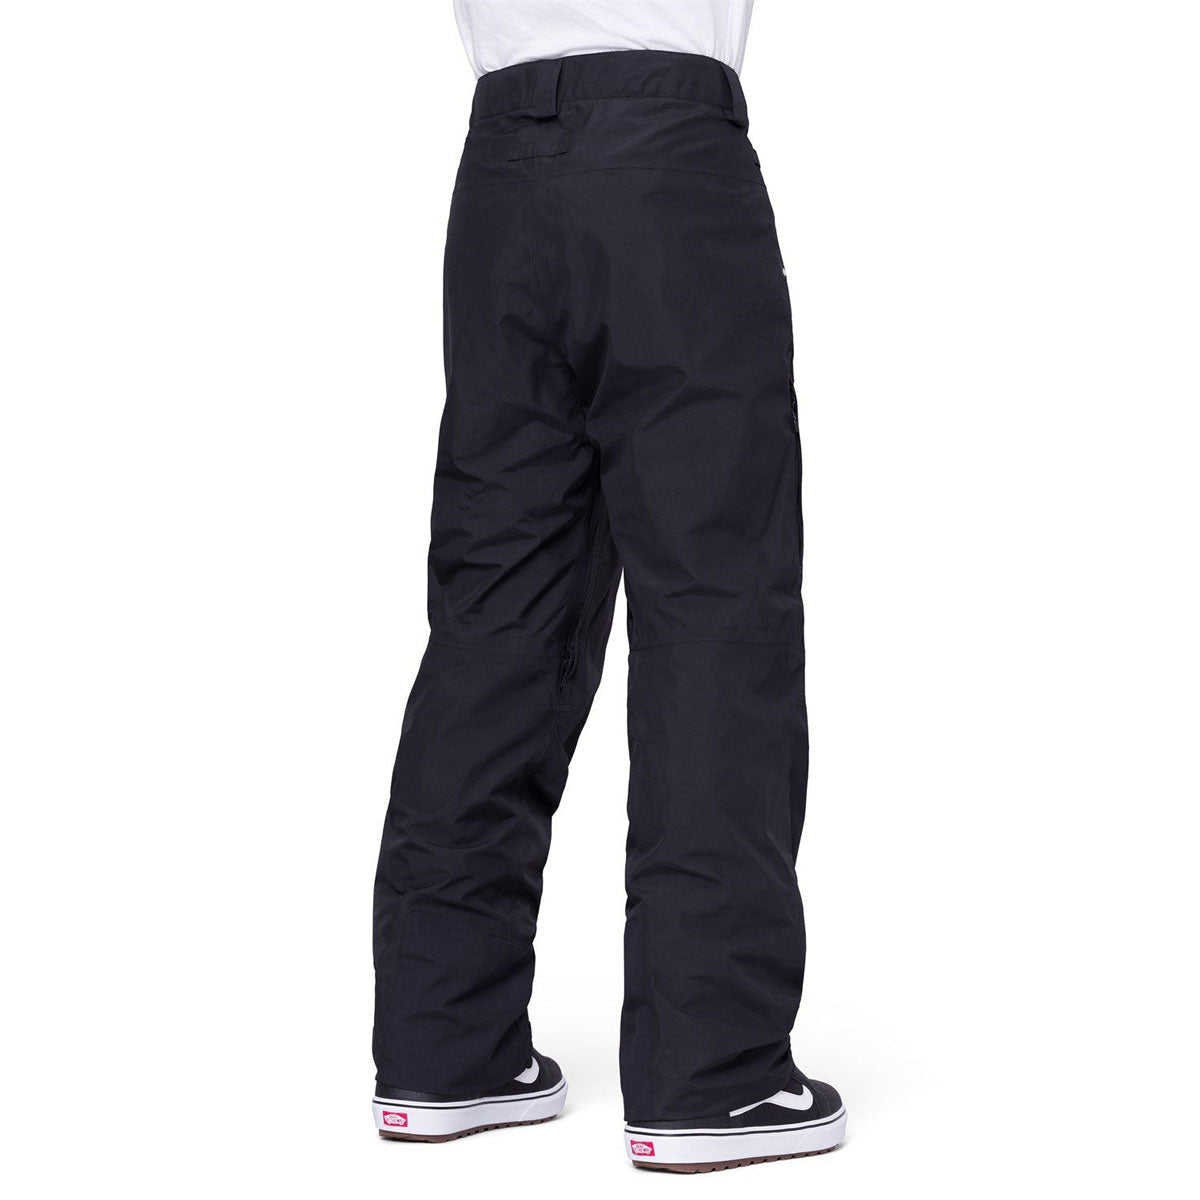 686 Gore-Tex Core Insulated Snowboard Pants - Black image 2